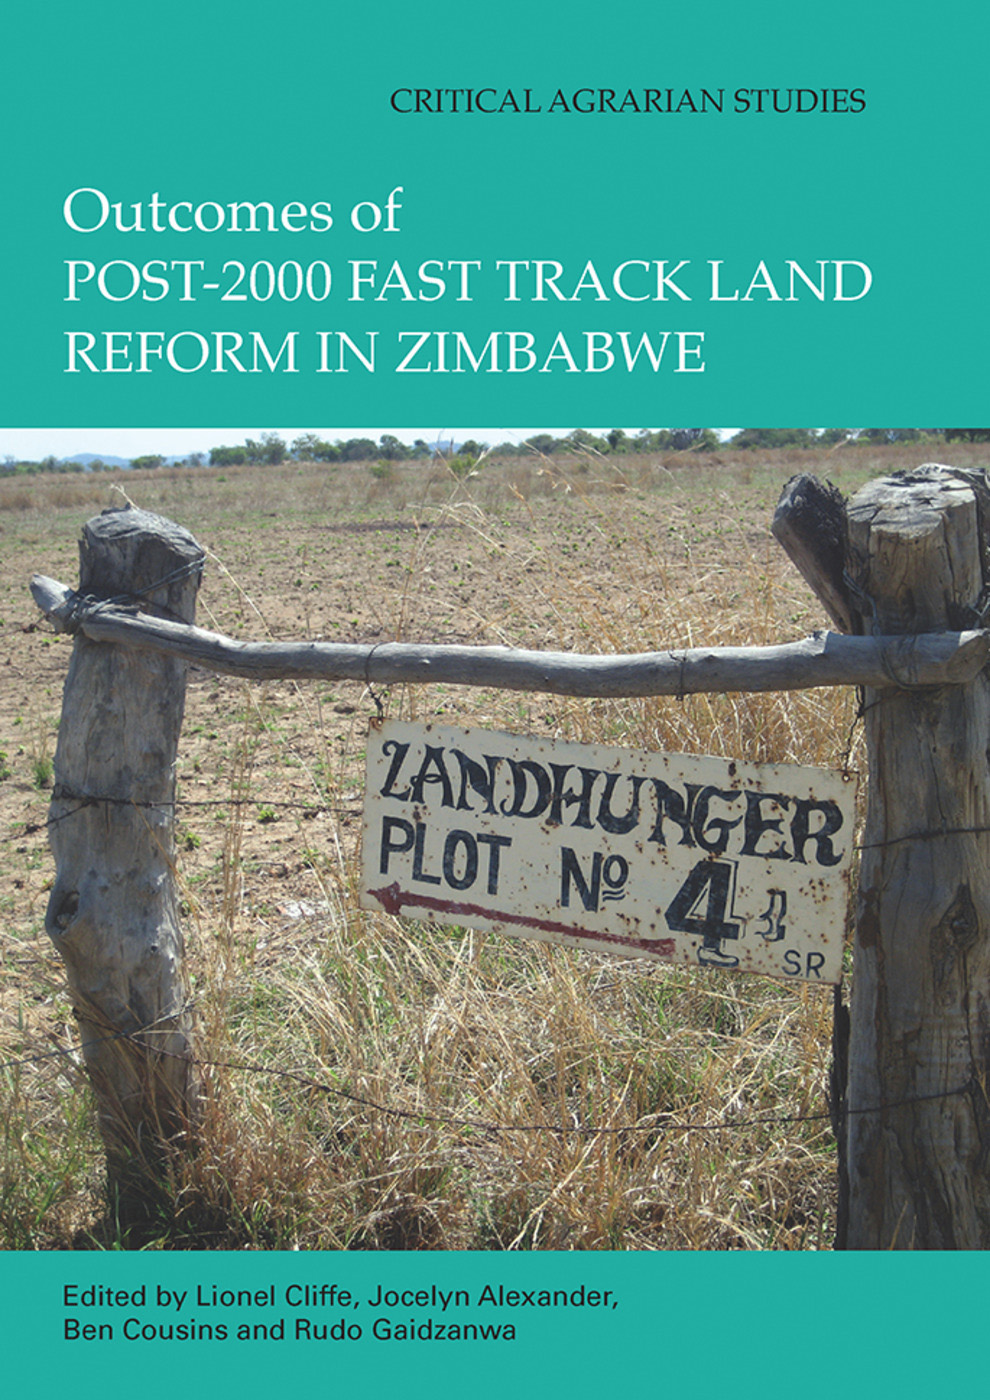 Outcomes of Post-2000 Fast Track Land Reform in Zimbabwe (Edited by Lionel Cliffe, Jocelyn Alexander, Ben Cousins and Rudo Gaidzanwa) Promo Image